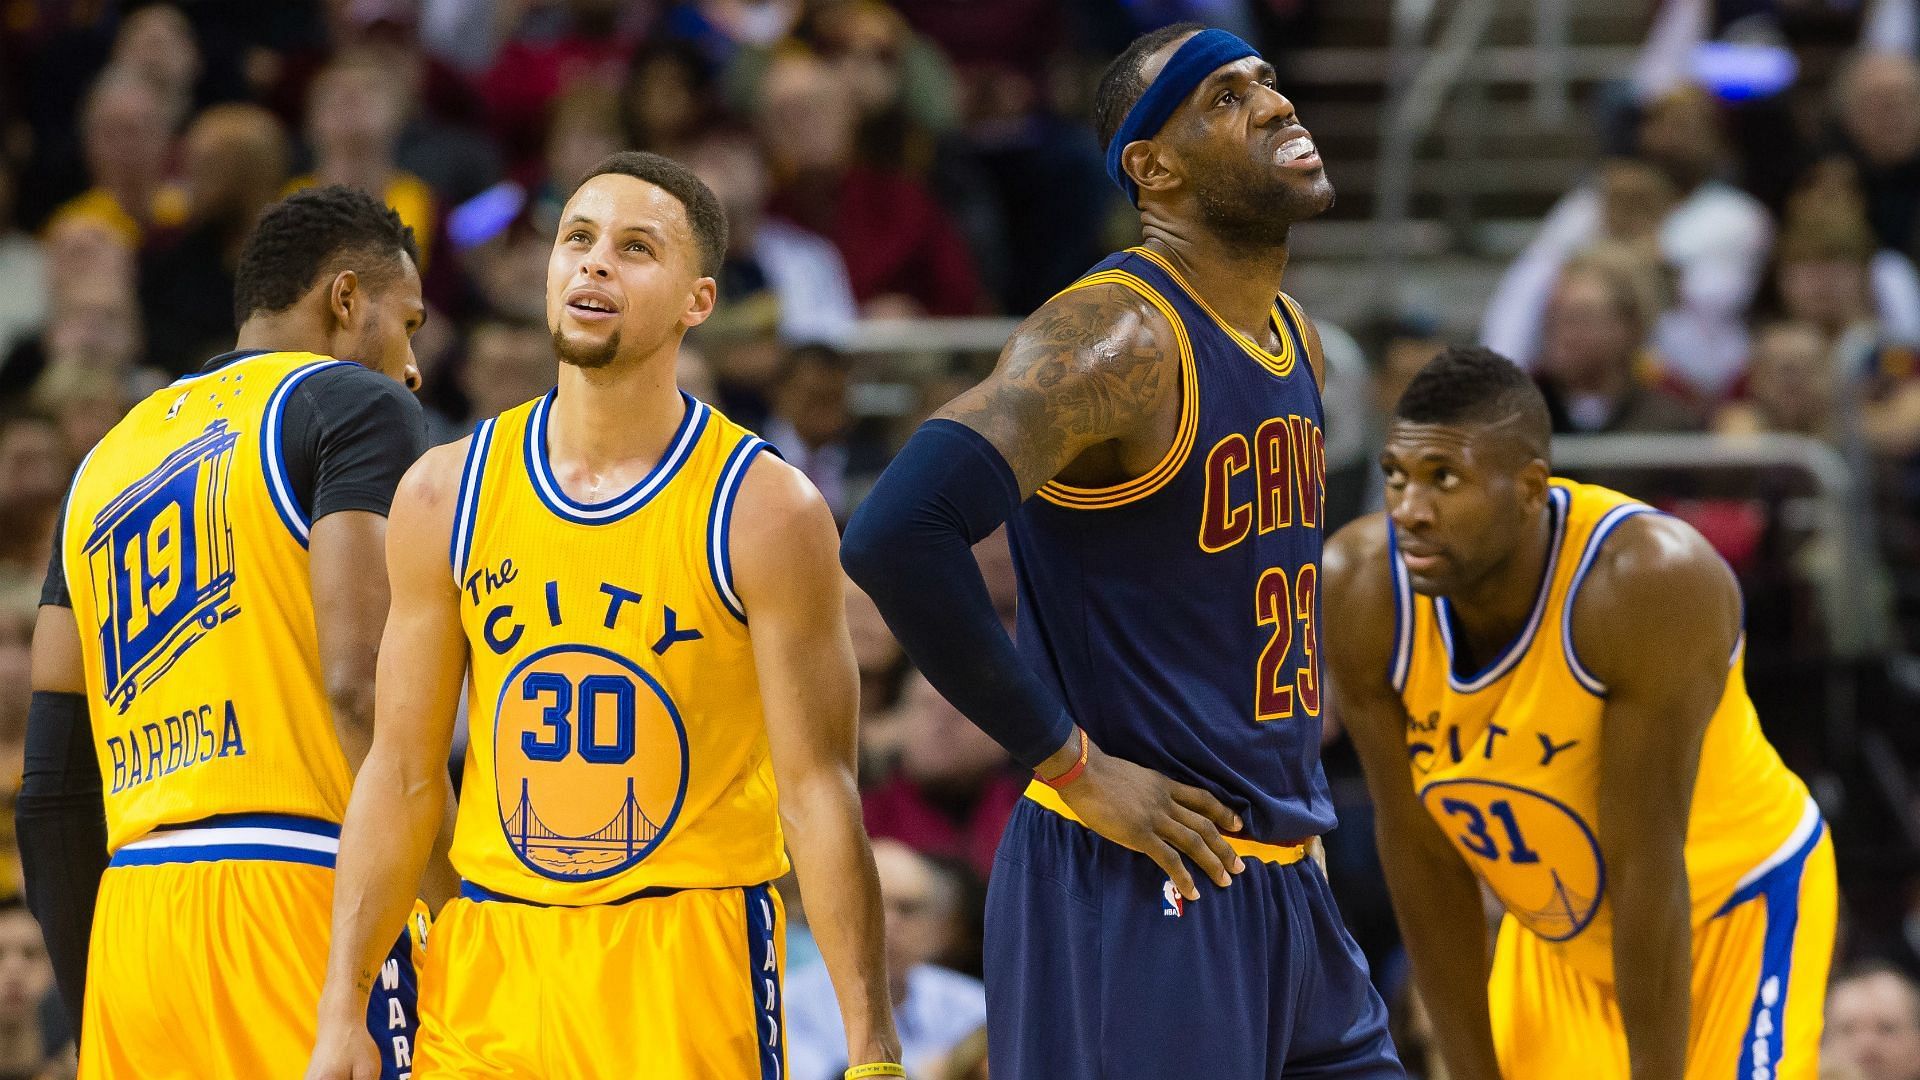 Steph Curry and LeBron James battled in a series for the ages for the 2016 NBA championship. [Photo: Sporting News]